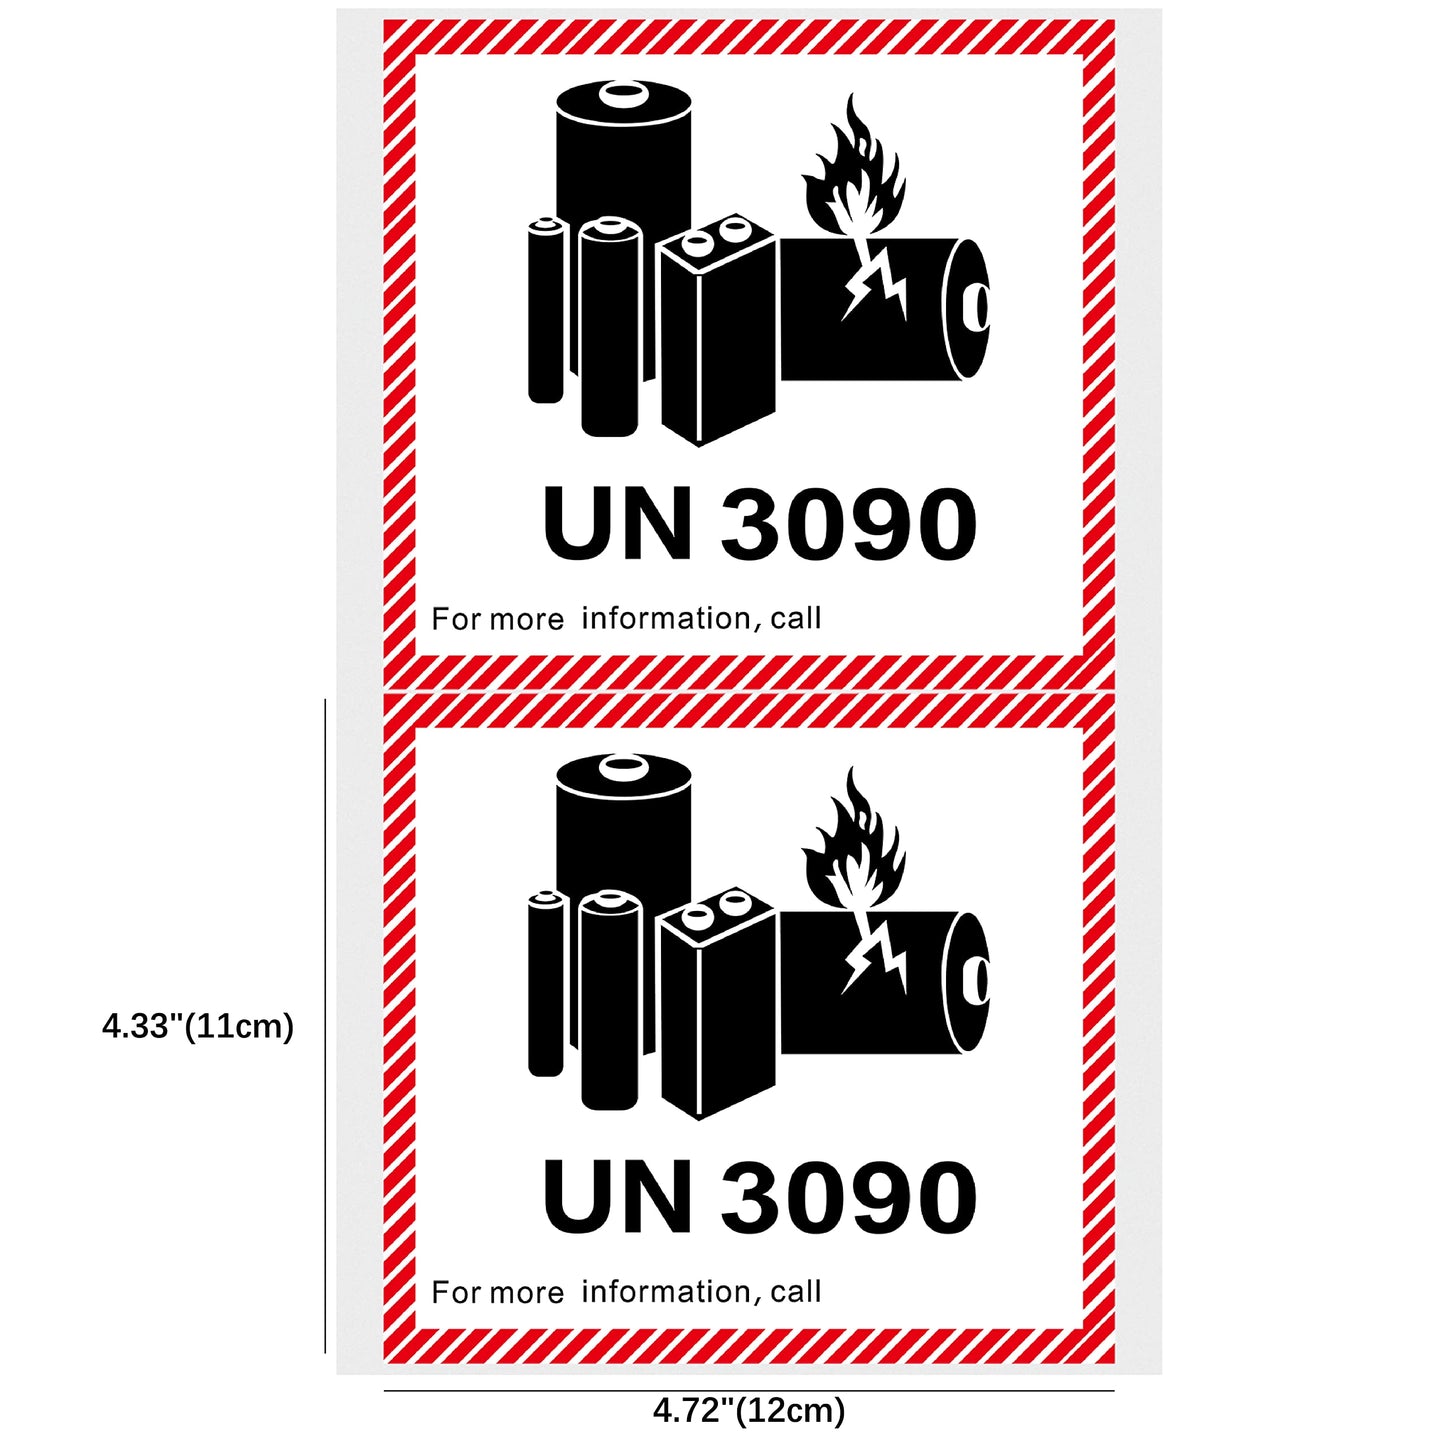 Hybsk 4.7" x 4.3" Lithium Ion Battery Transport Caution Warning Labels 50 Adhesive Stickers